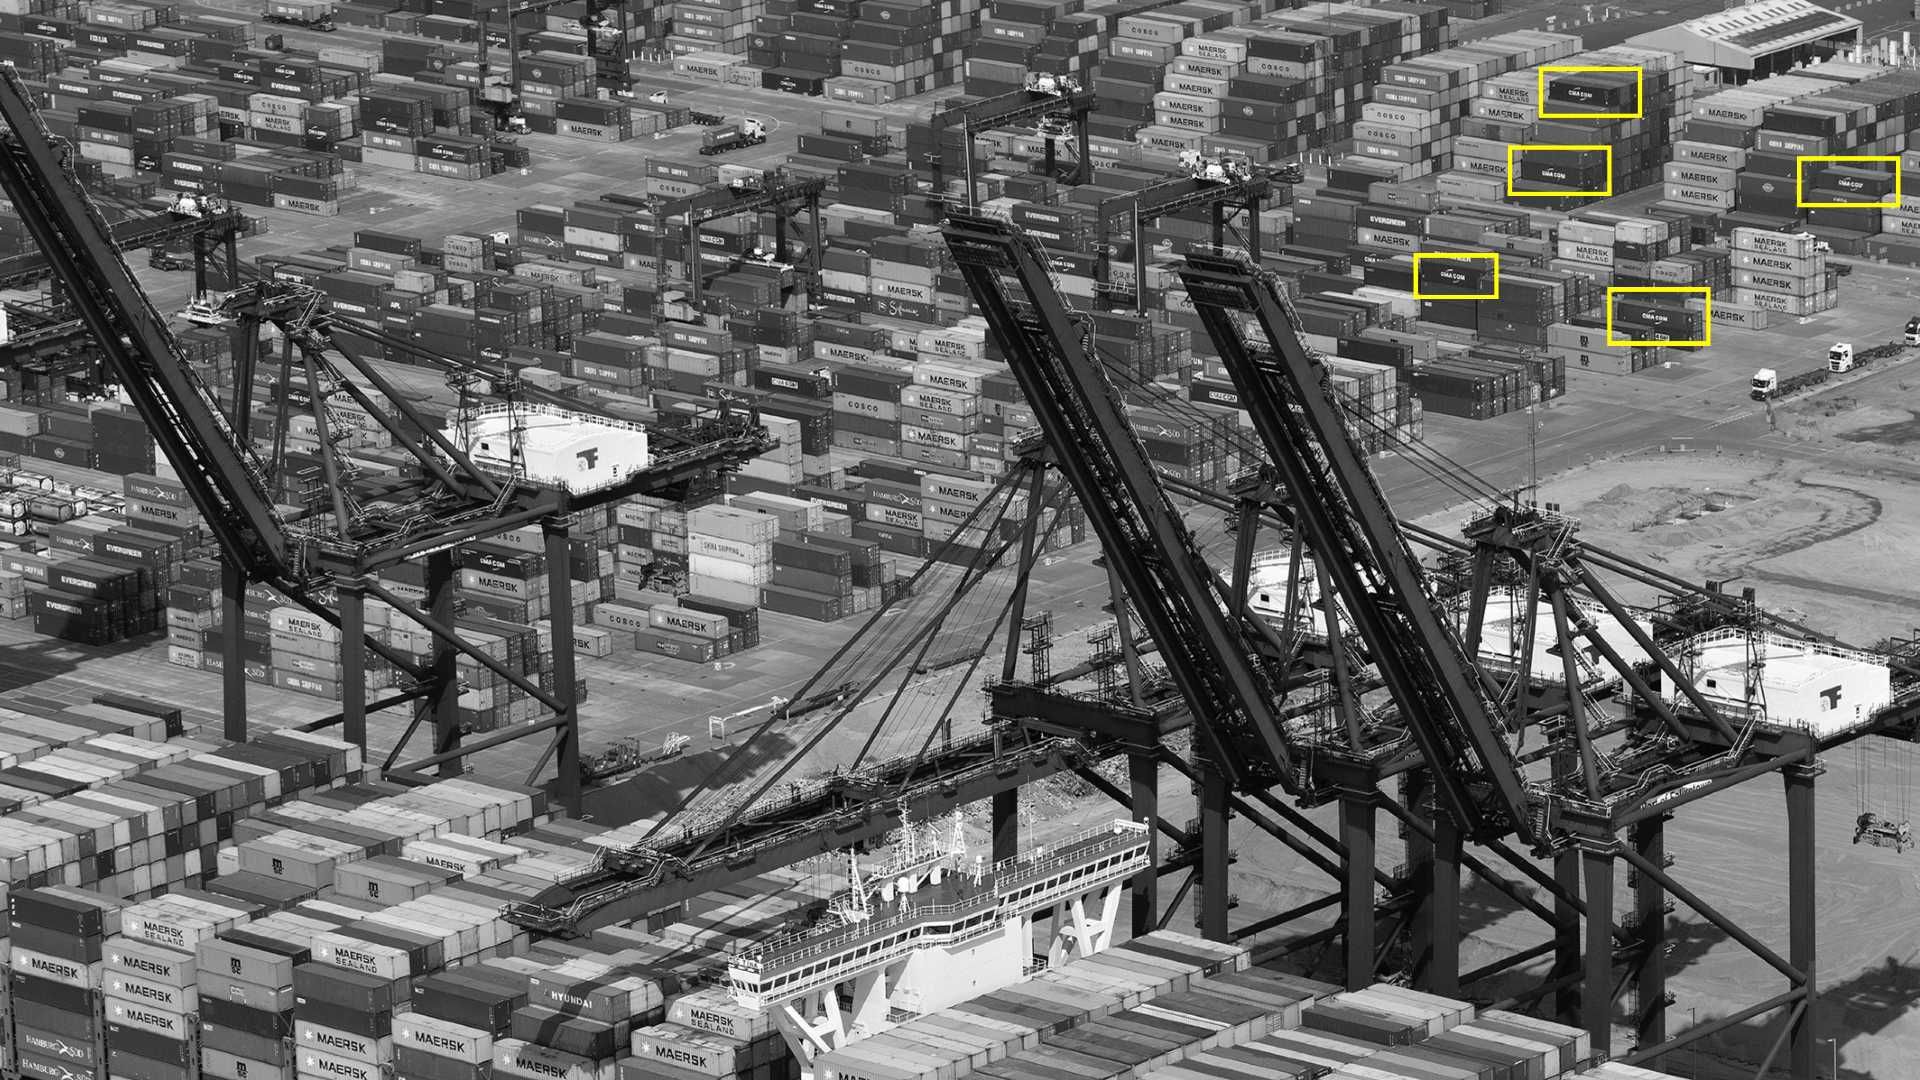 “Container ship aerial image - The MSC Tina at Felixstowe docks" by John Fielding, used under CC BY 2.0 / Cropped, desaturated, resampled and recoloured from original